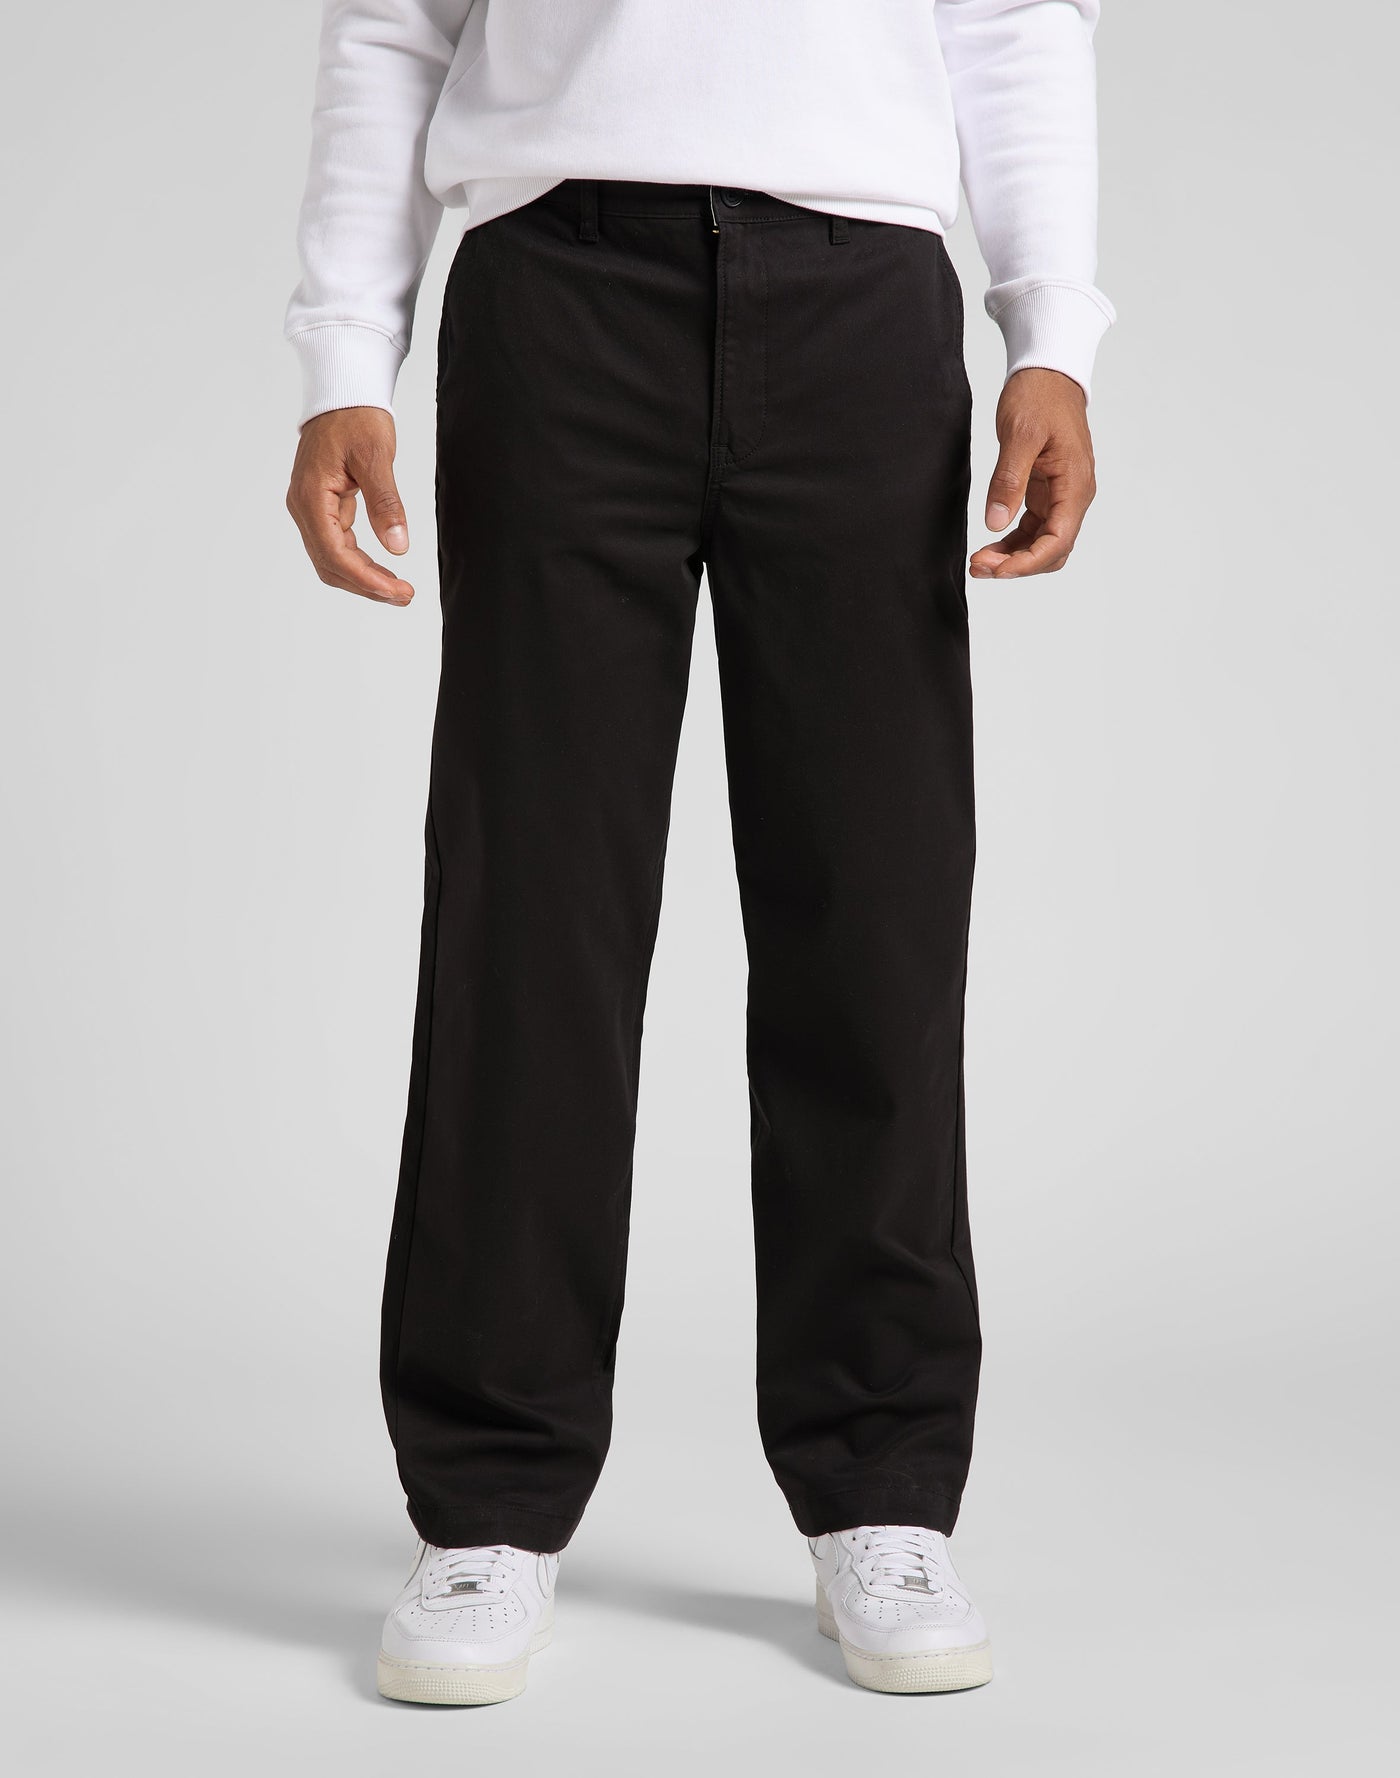 Relaxed Chino in Black Chinos Lee   